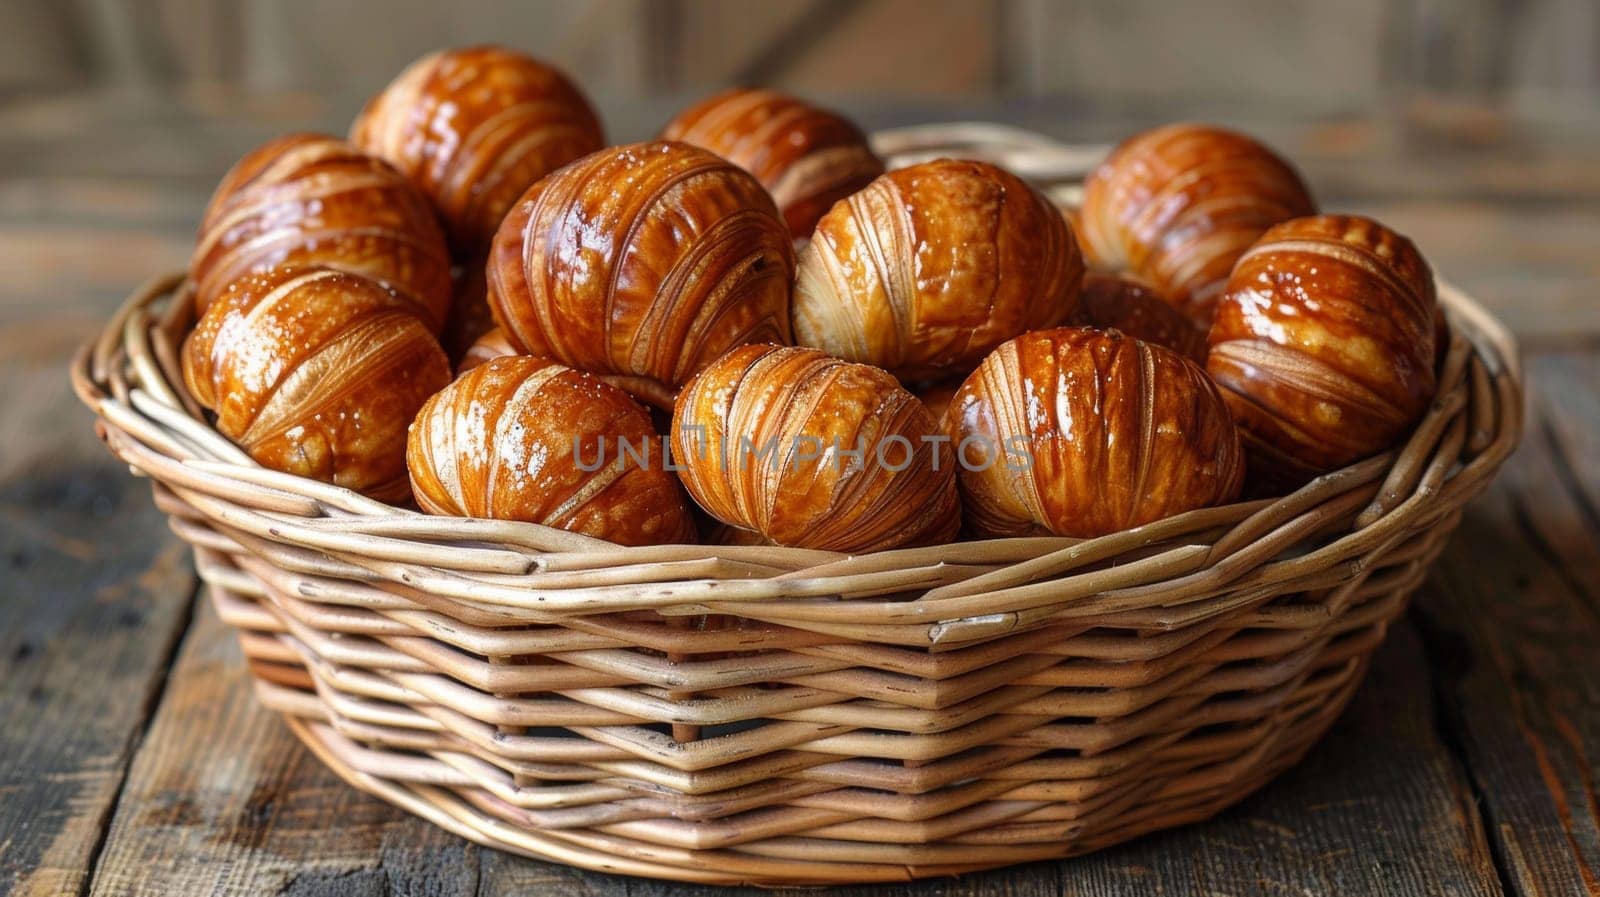 A basket of pastries in a wooden wicker bowl on top of the table, AI by starush